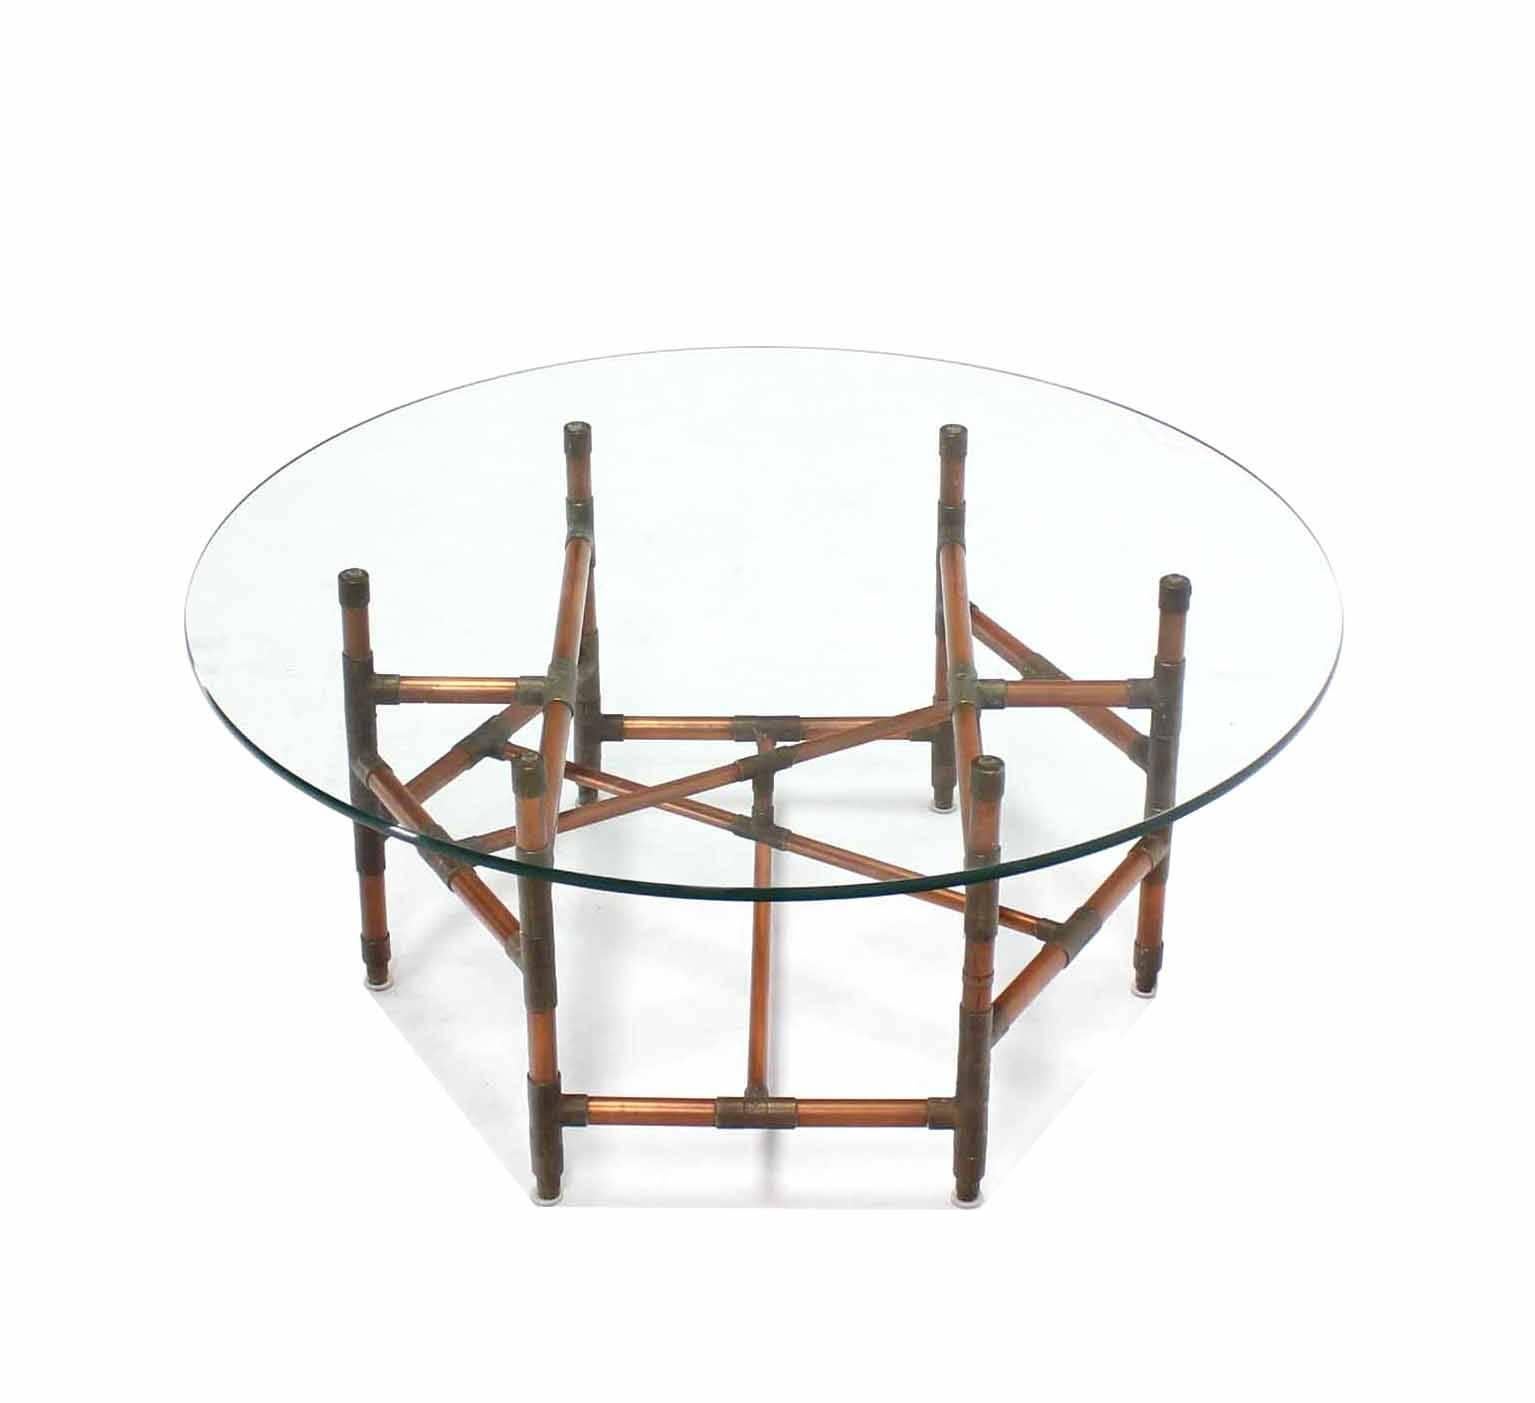 Very creative copper pipe base artwork coffee table with round glass top. Architectural.